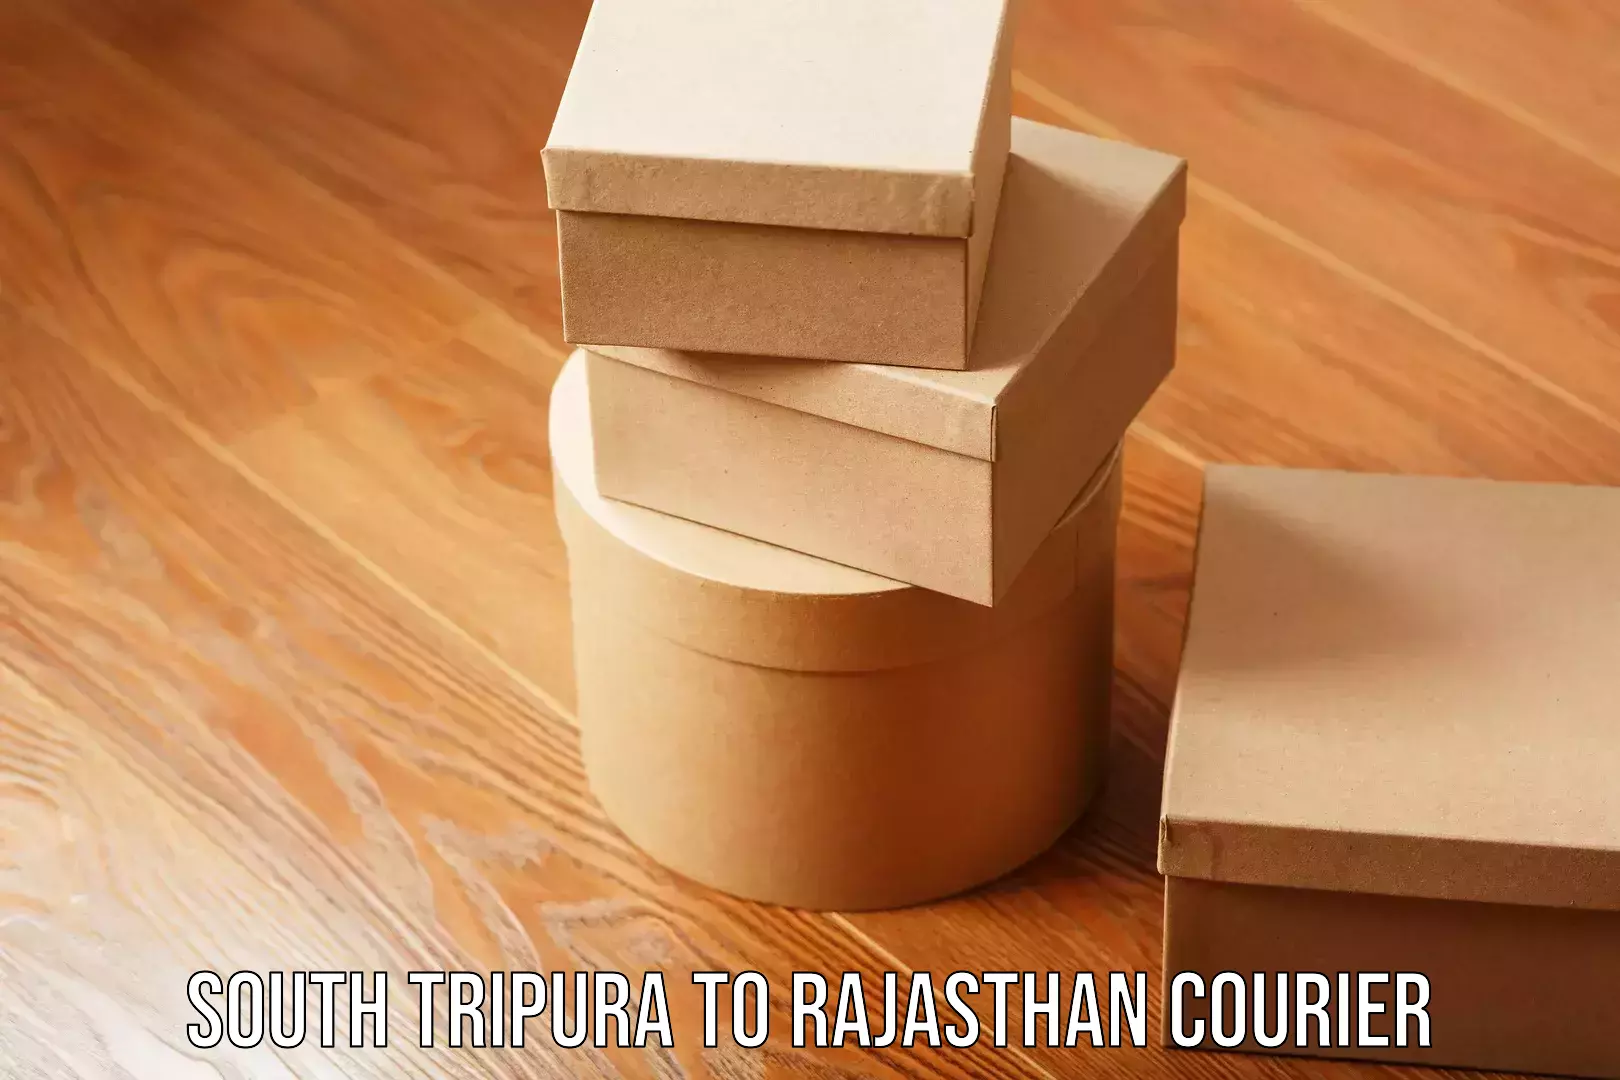 Advanced courier platforms South Tripura to Rajasthan